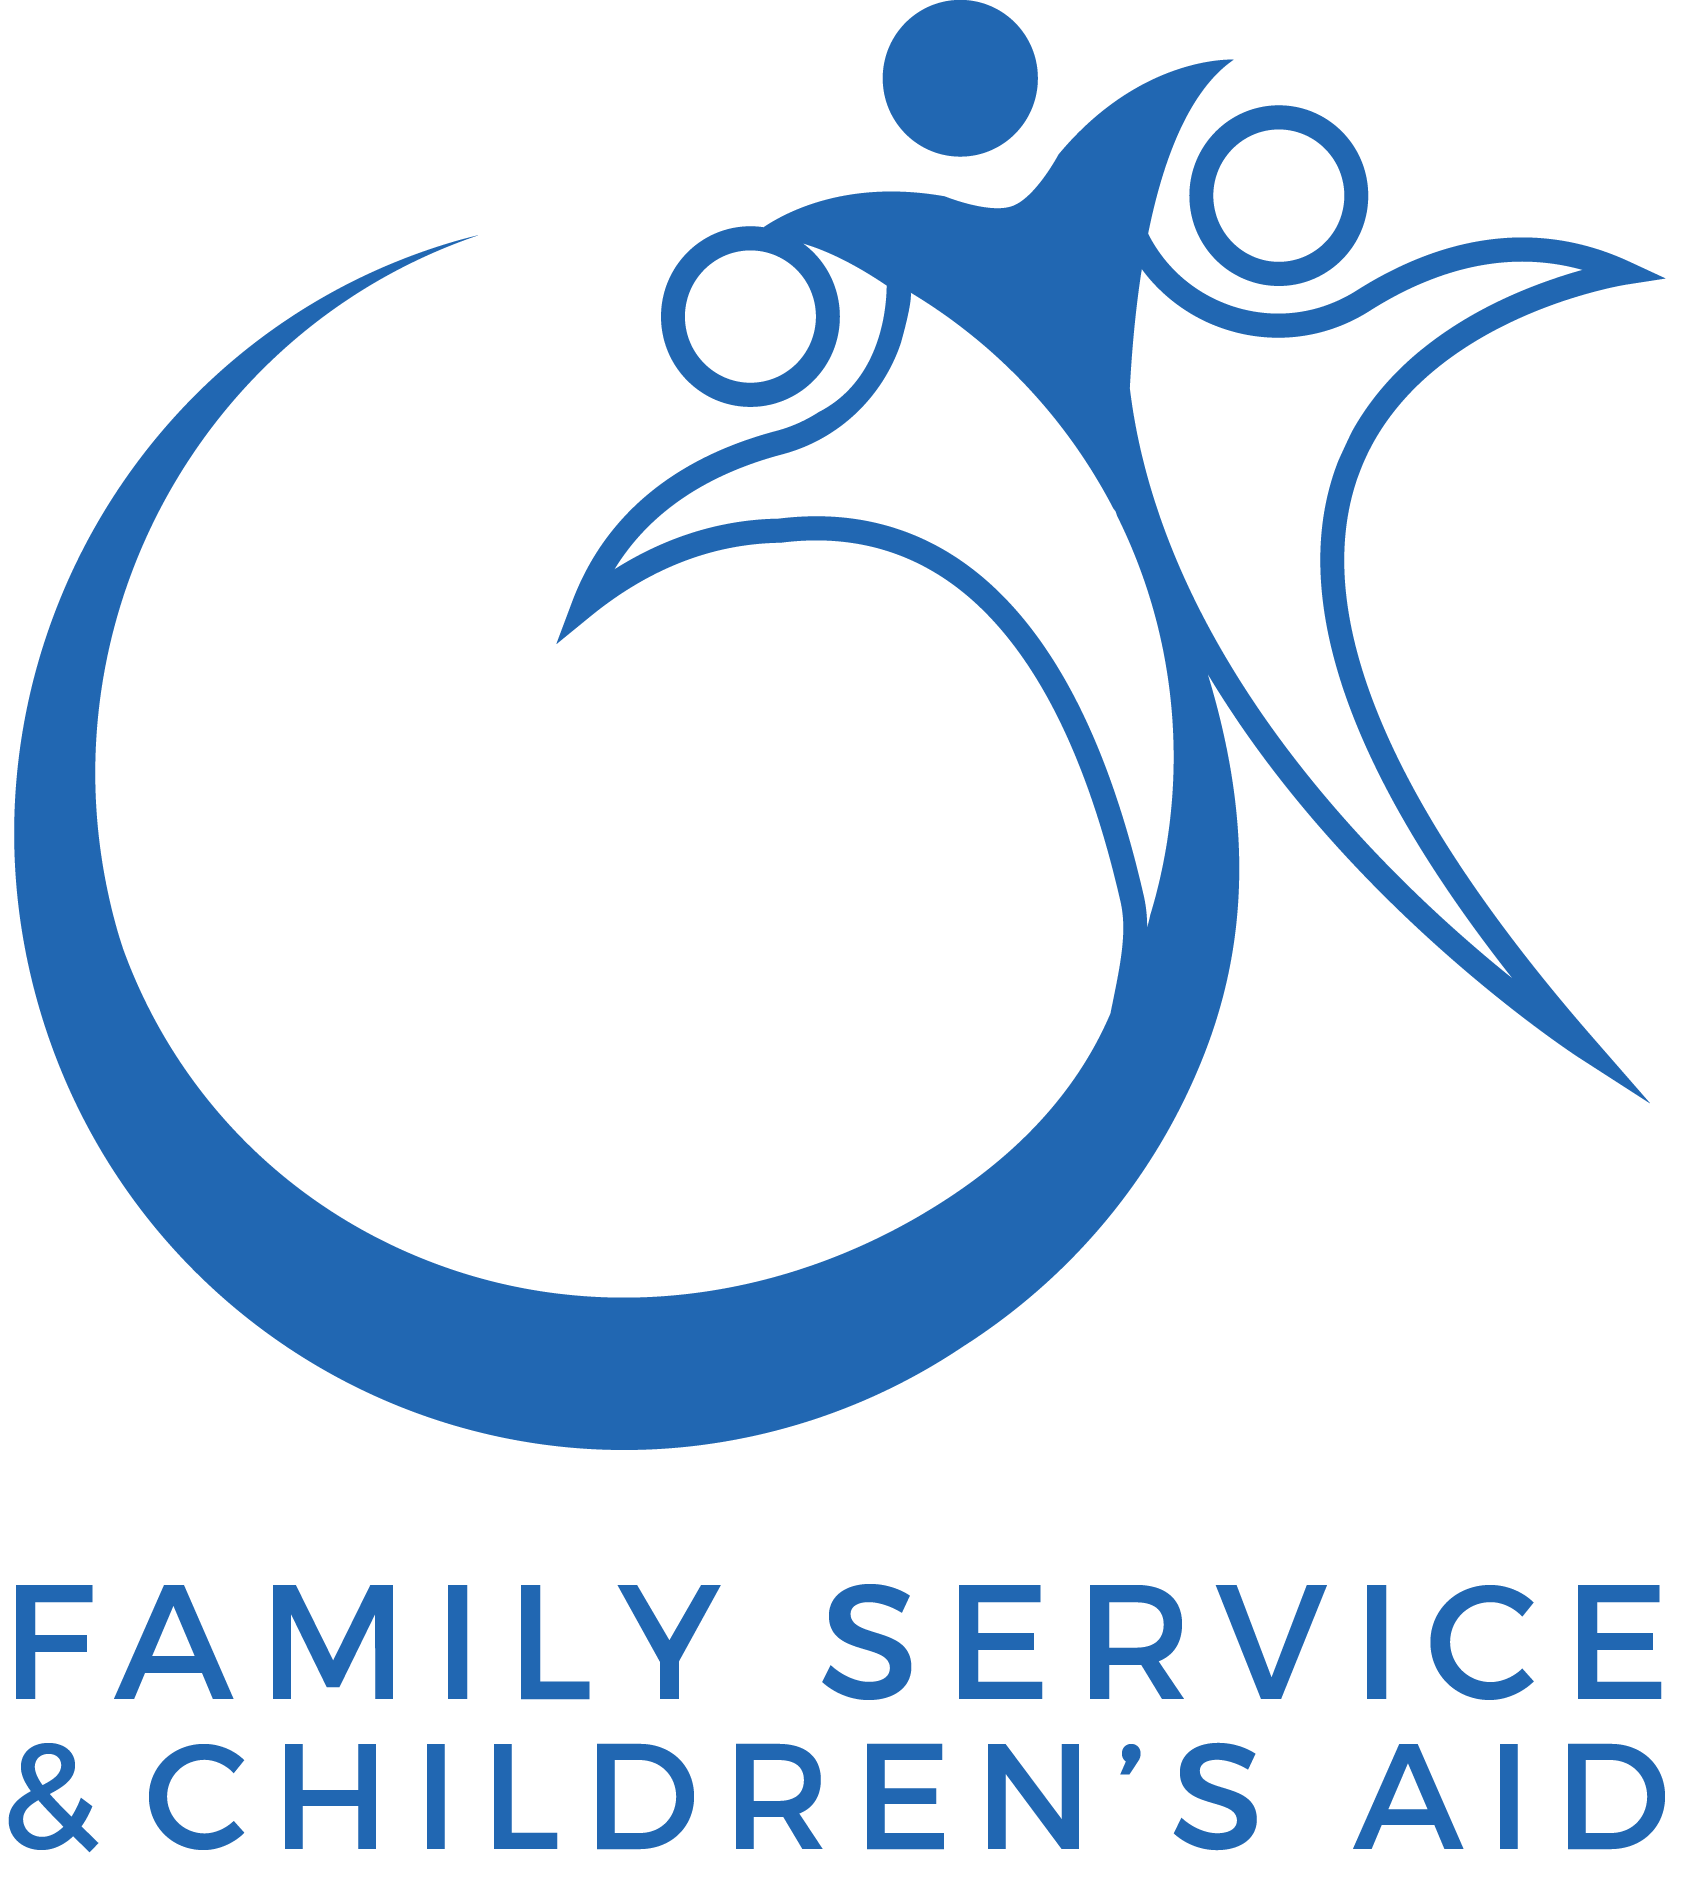 Family Services & Children's Aid